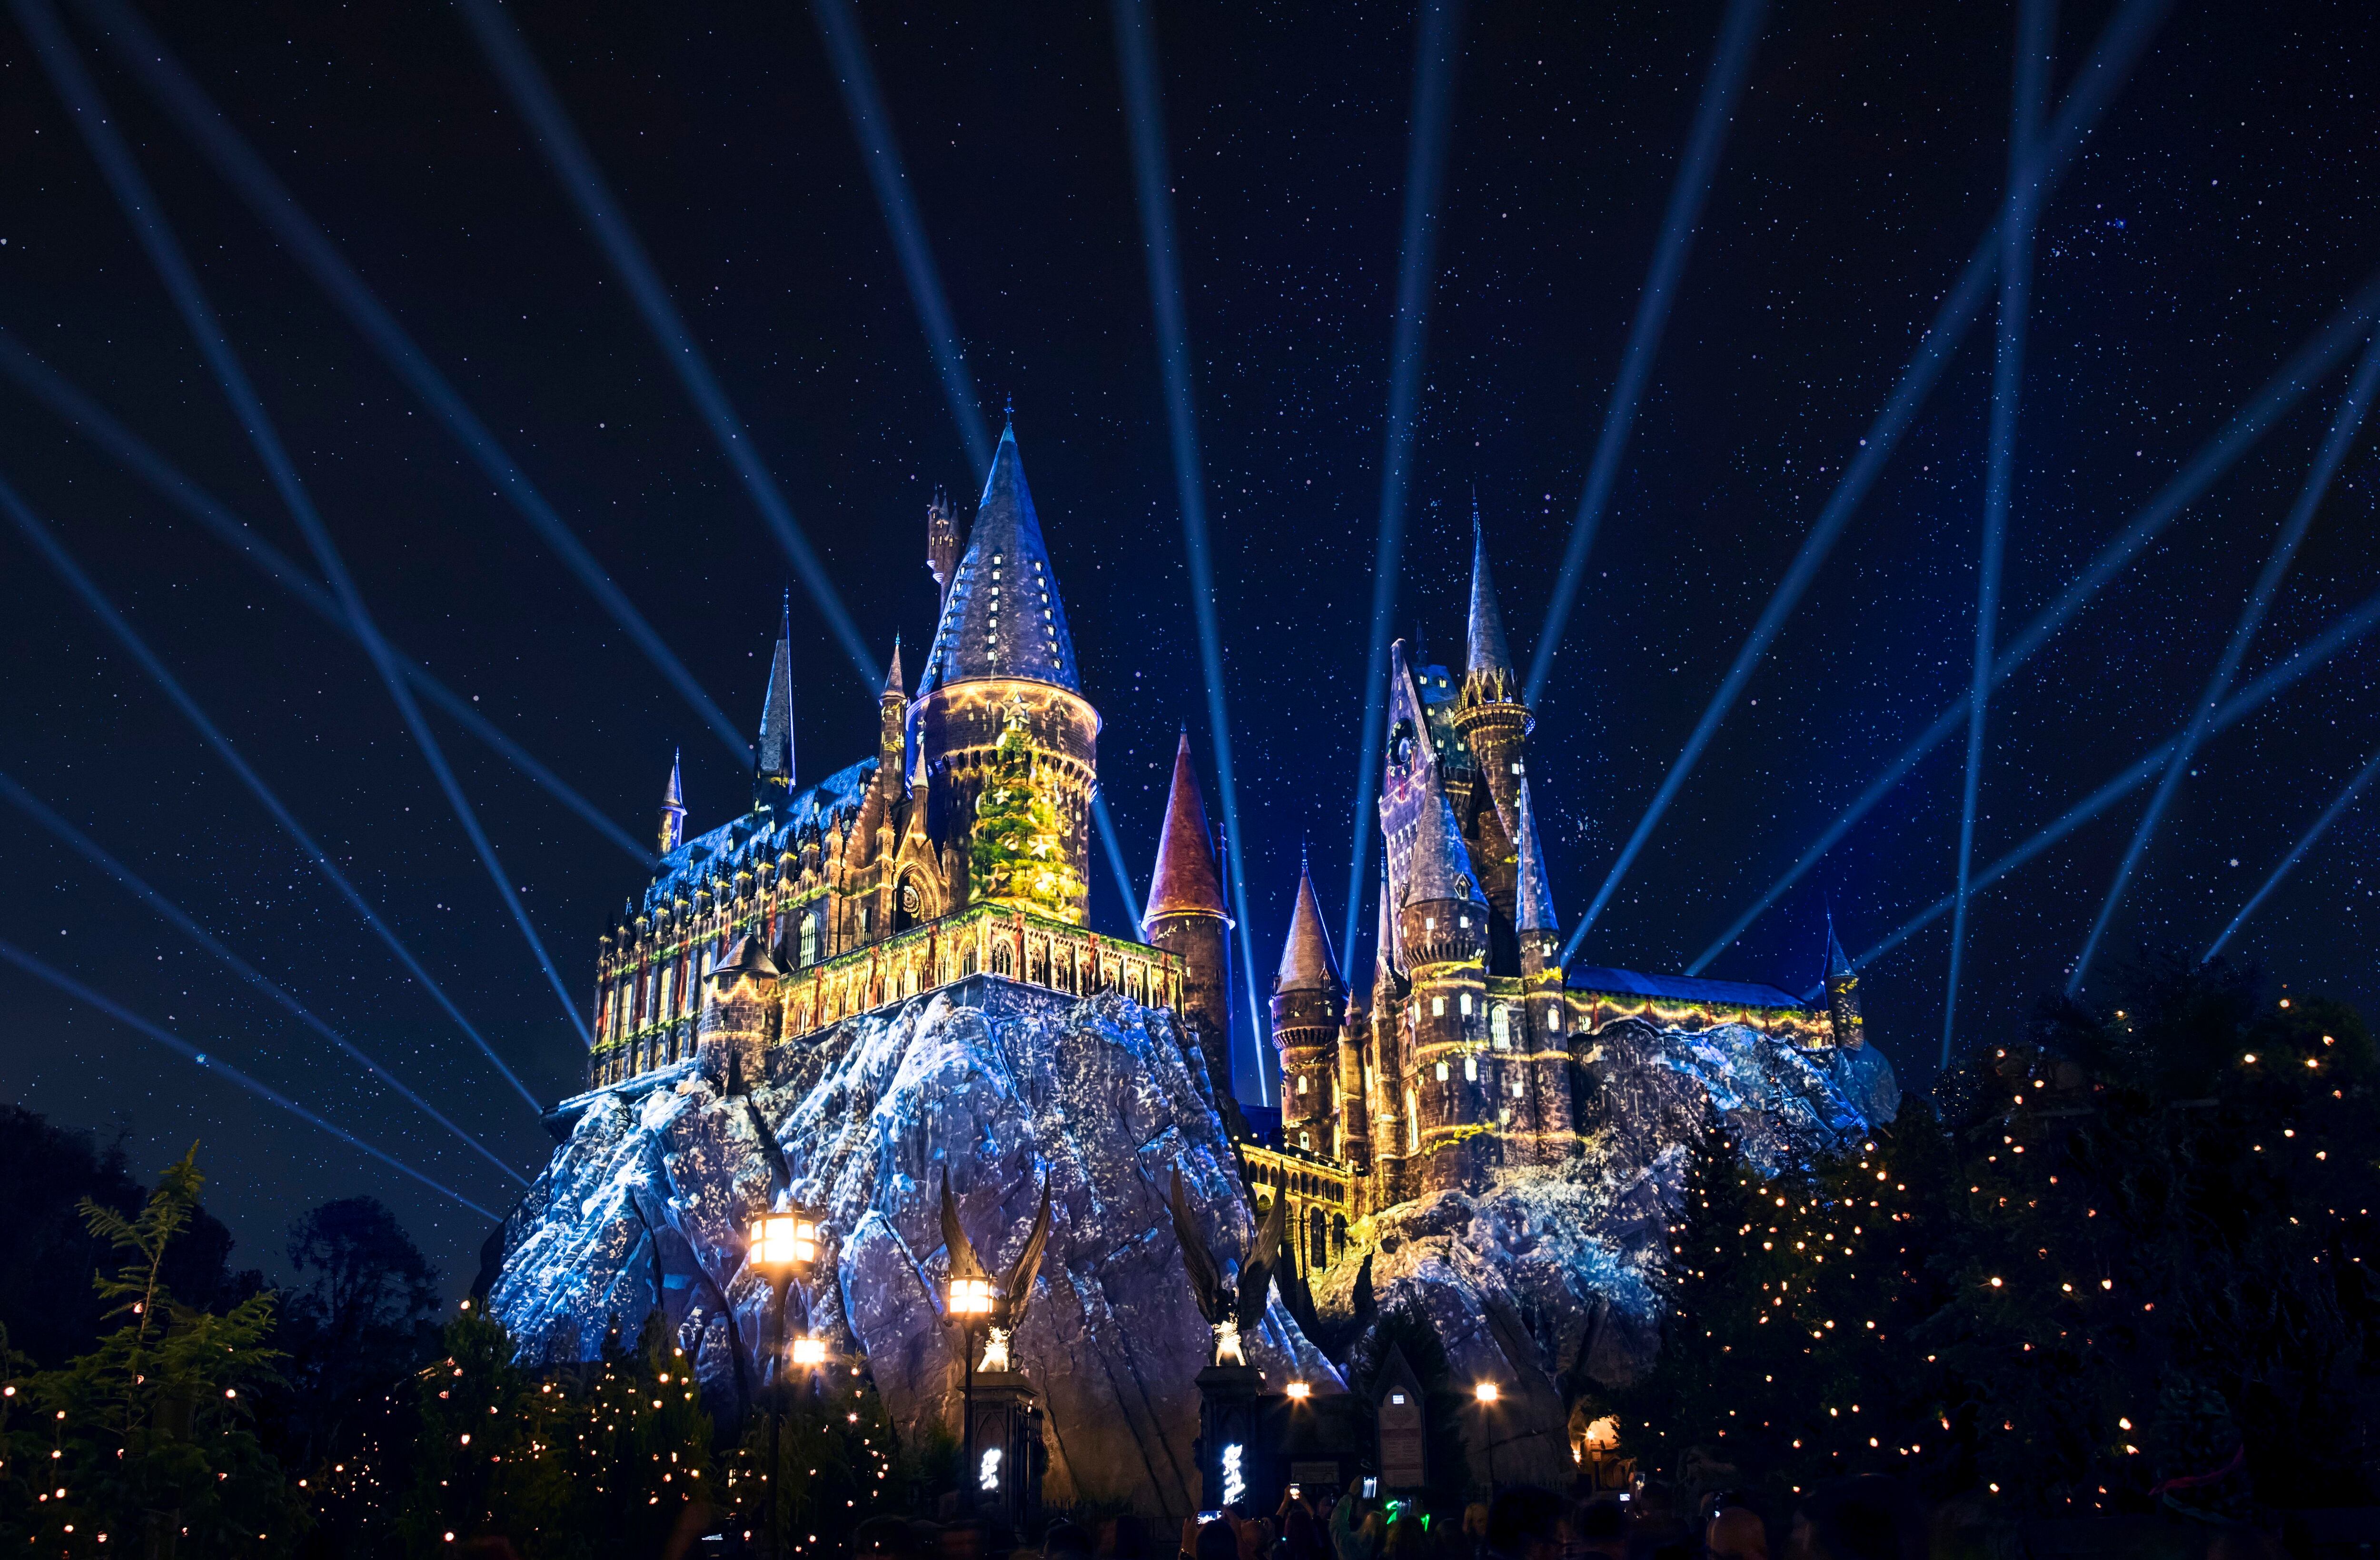 The Wizarding World of Harry Potter is Coming to Atlanta!